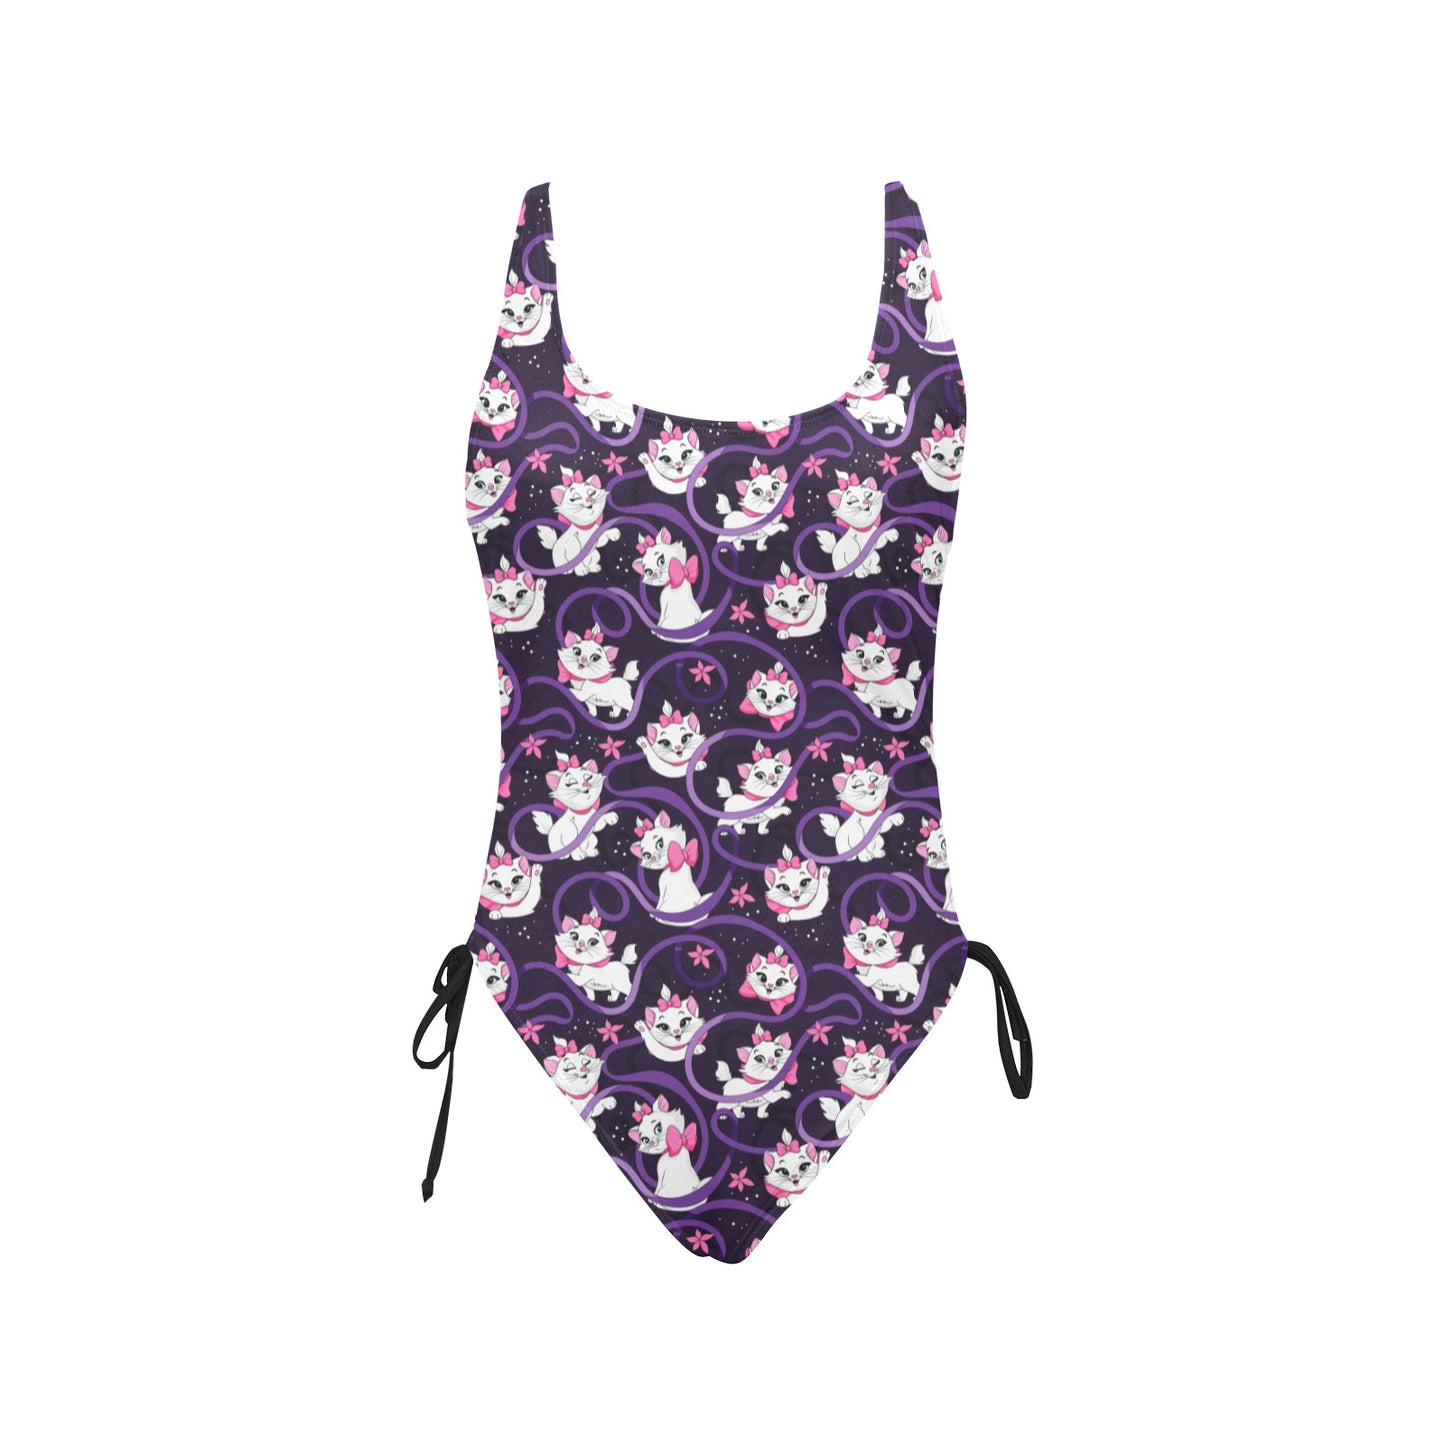 Because I'm A Lady Drawstring Side Women's One-Piece Swimsuit